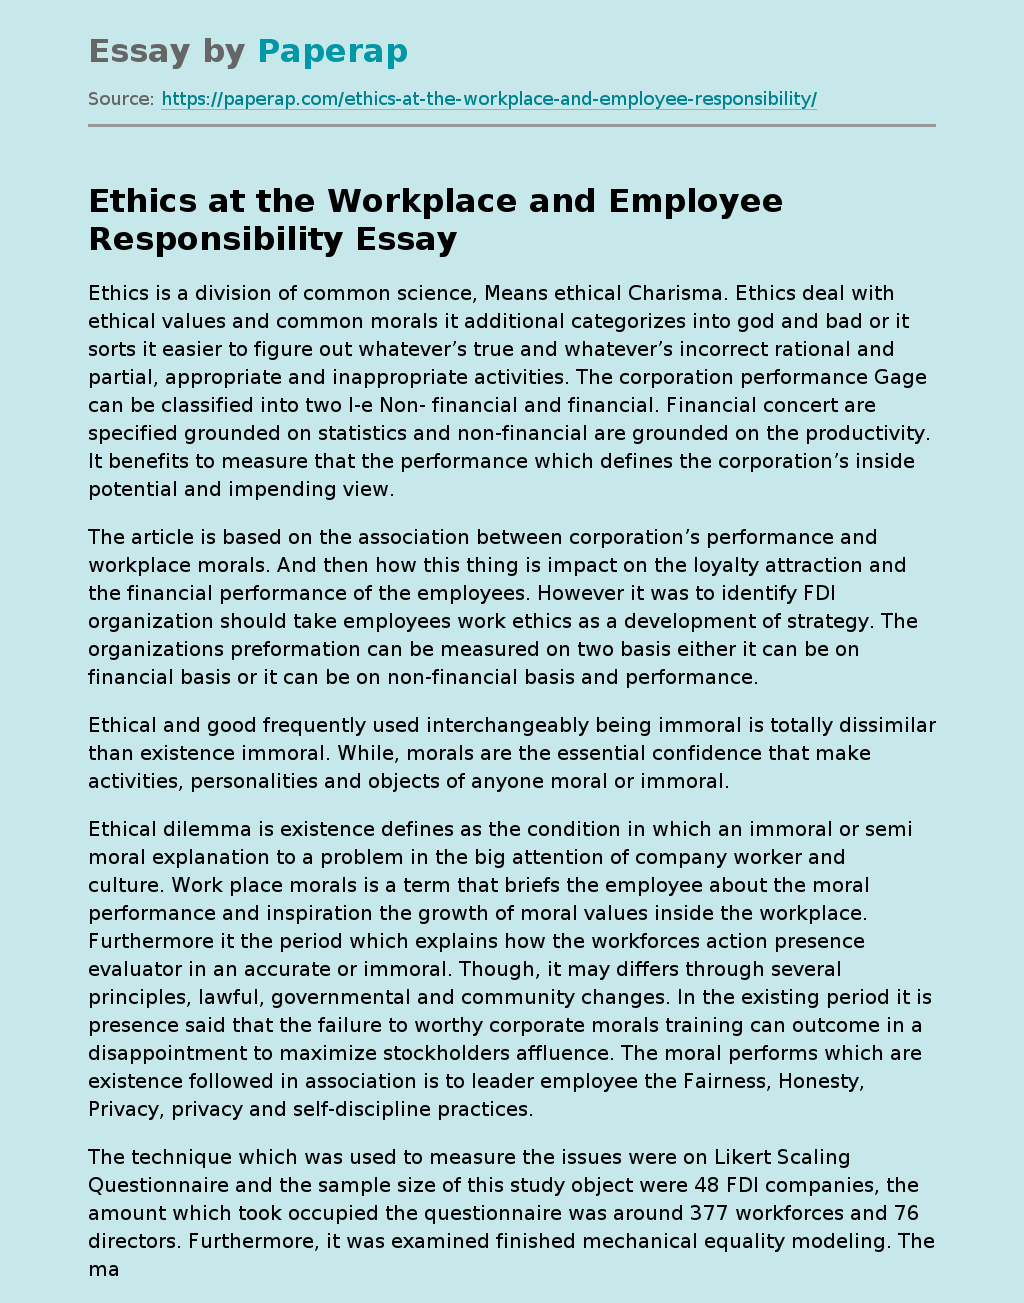 Ethics at the Workplace and Employee Responsibility